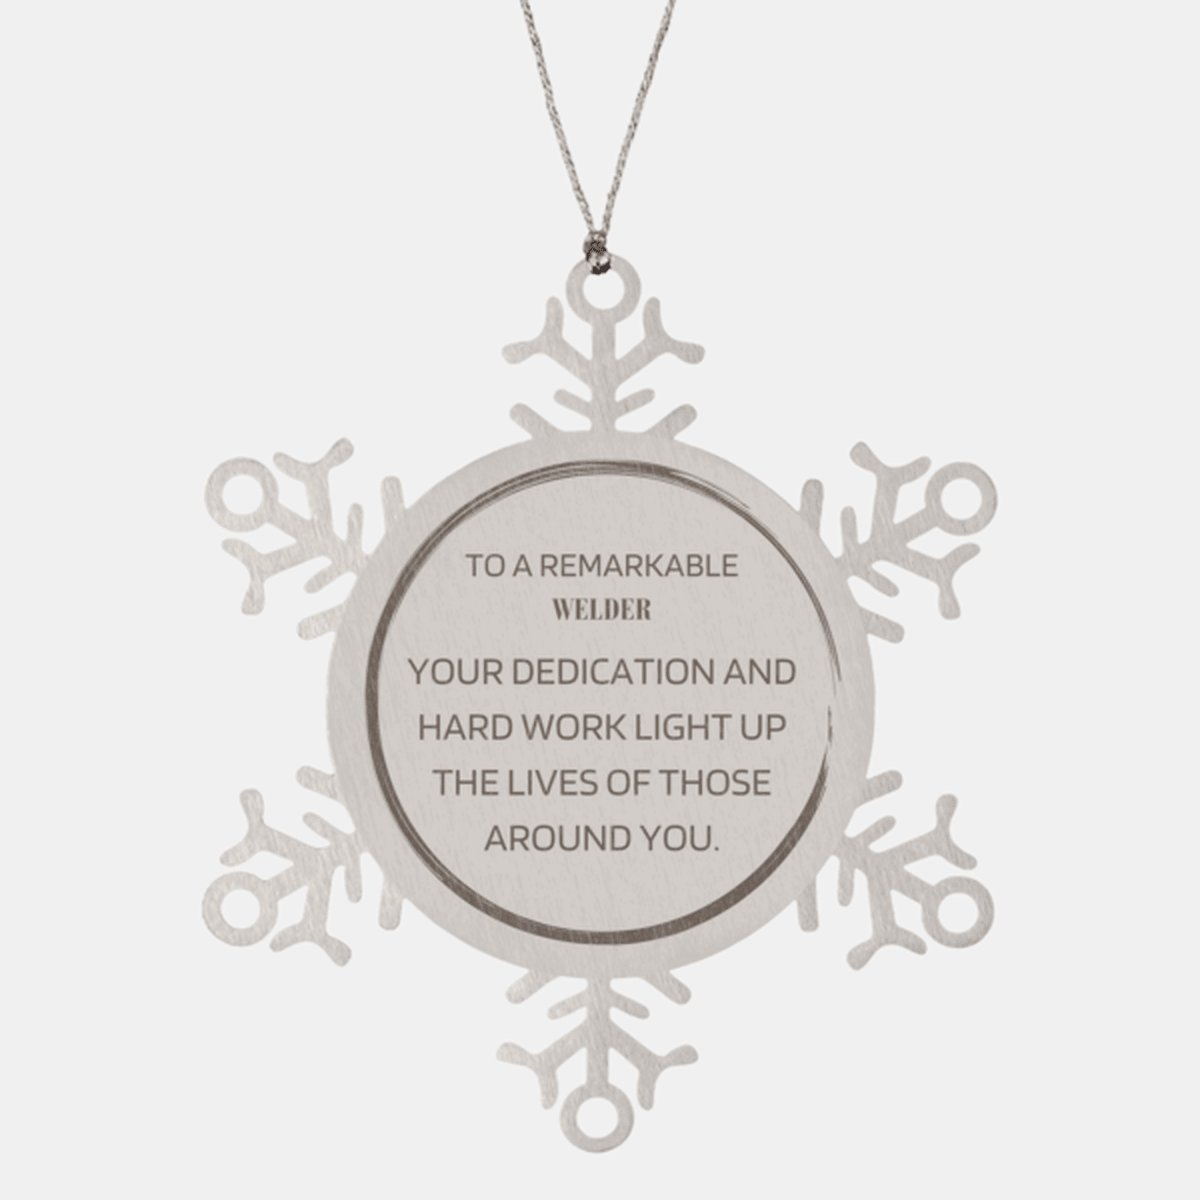 Remarkable Welder Gifts, Your dedication and hard work, Inspirational Birthday Christmas Unique Snowflake Ornament For Welder, Coworkers, Men, Women, Friends - Mallard Moon Gift Shop